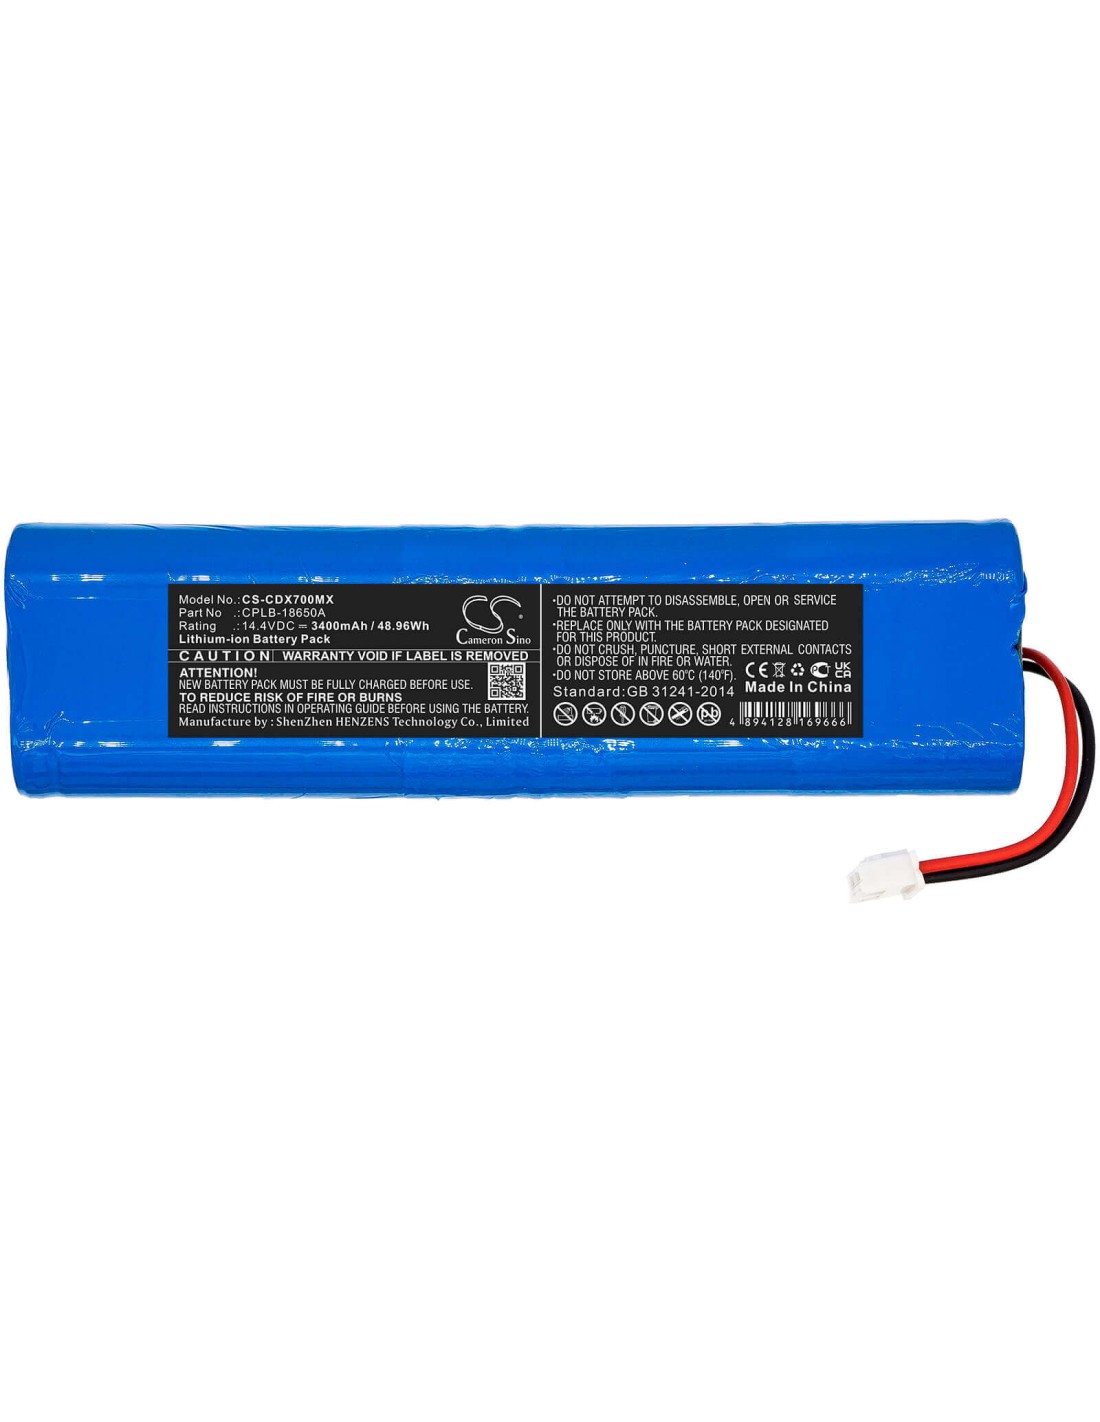 Battery for Creative, Deluxe-70 14.4V, 3400mAh - 48.96Wh